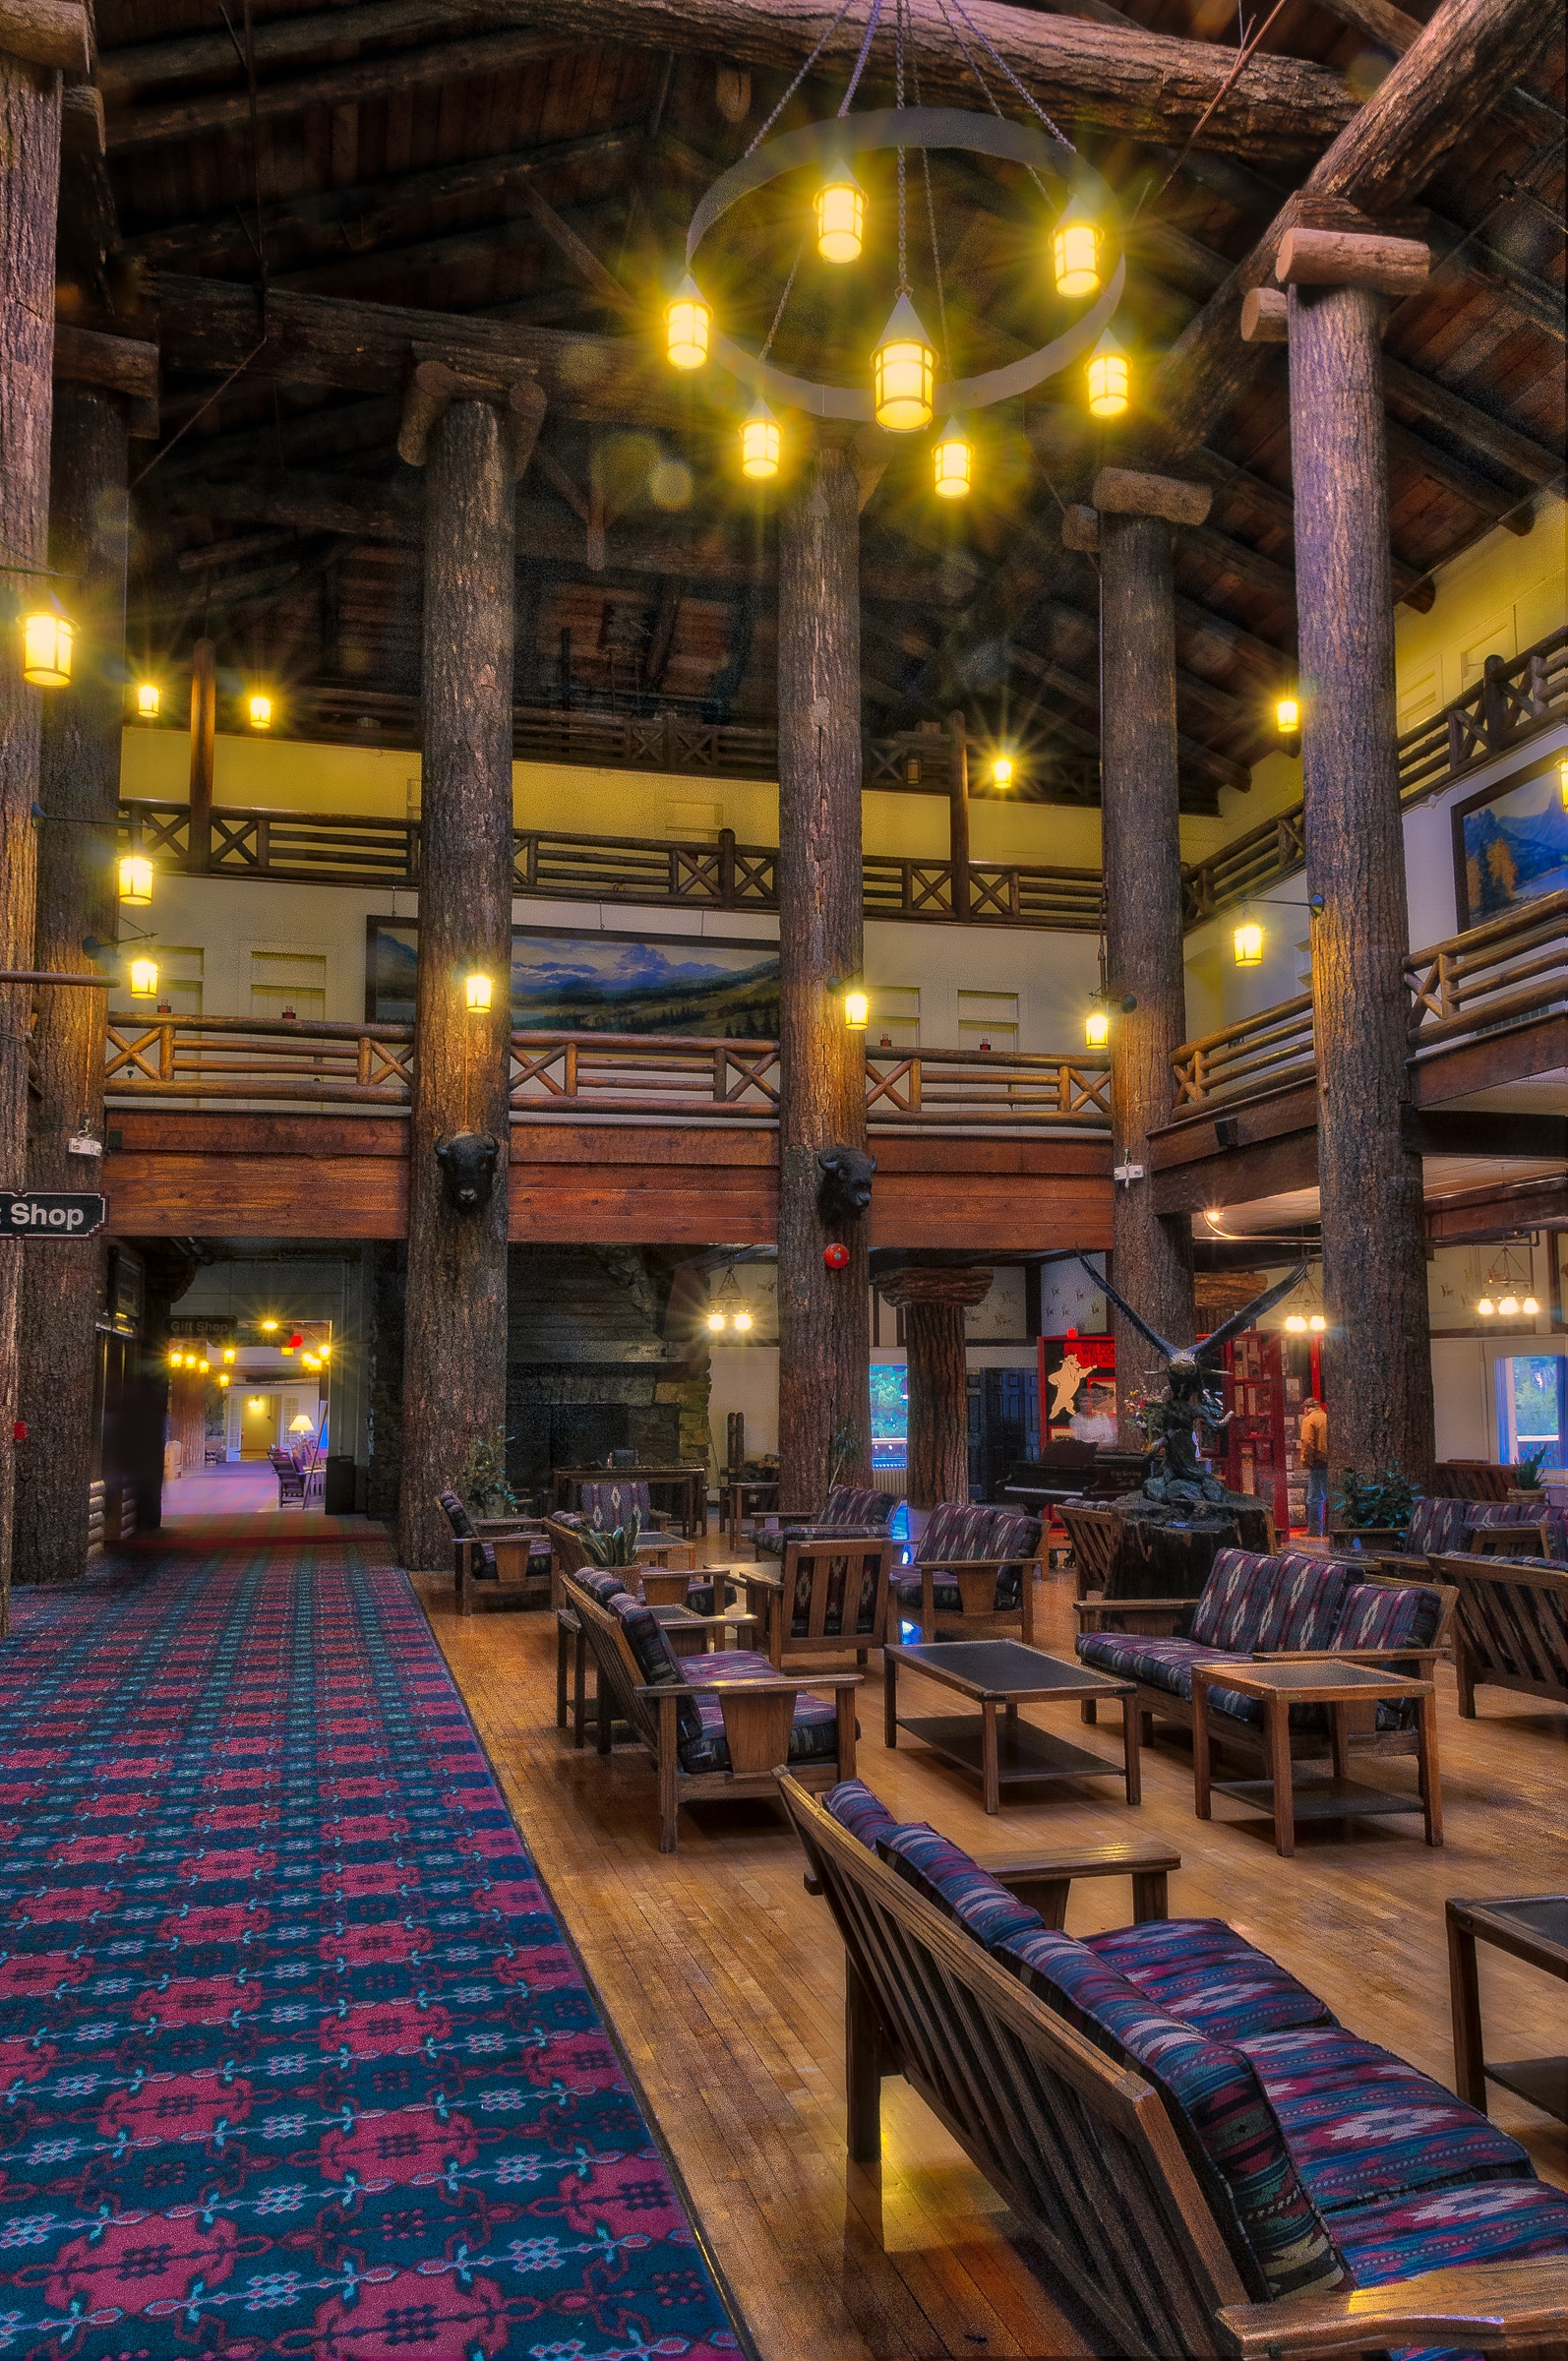 Ionic columns made from logs hold up the atrium of the Glacier Park Lodge in East Glacier, Montana.